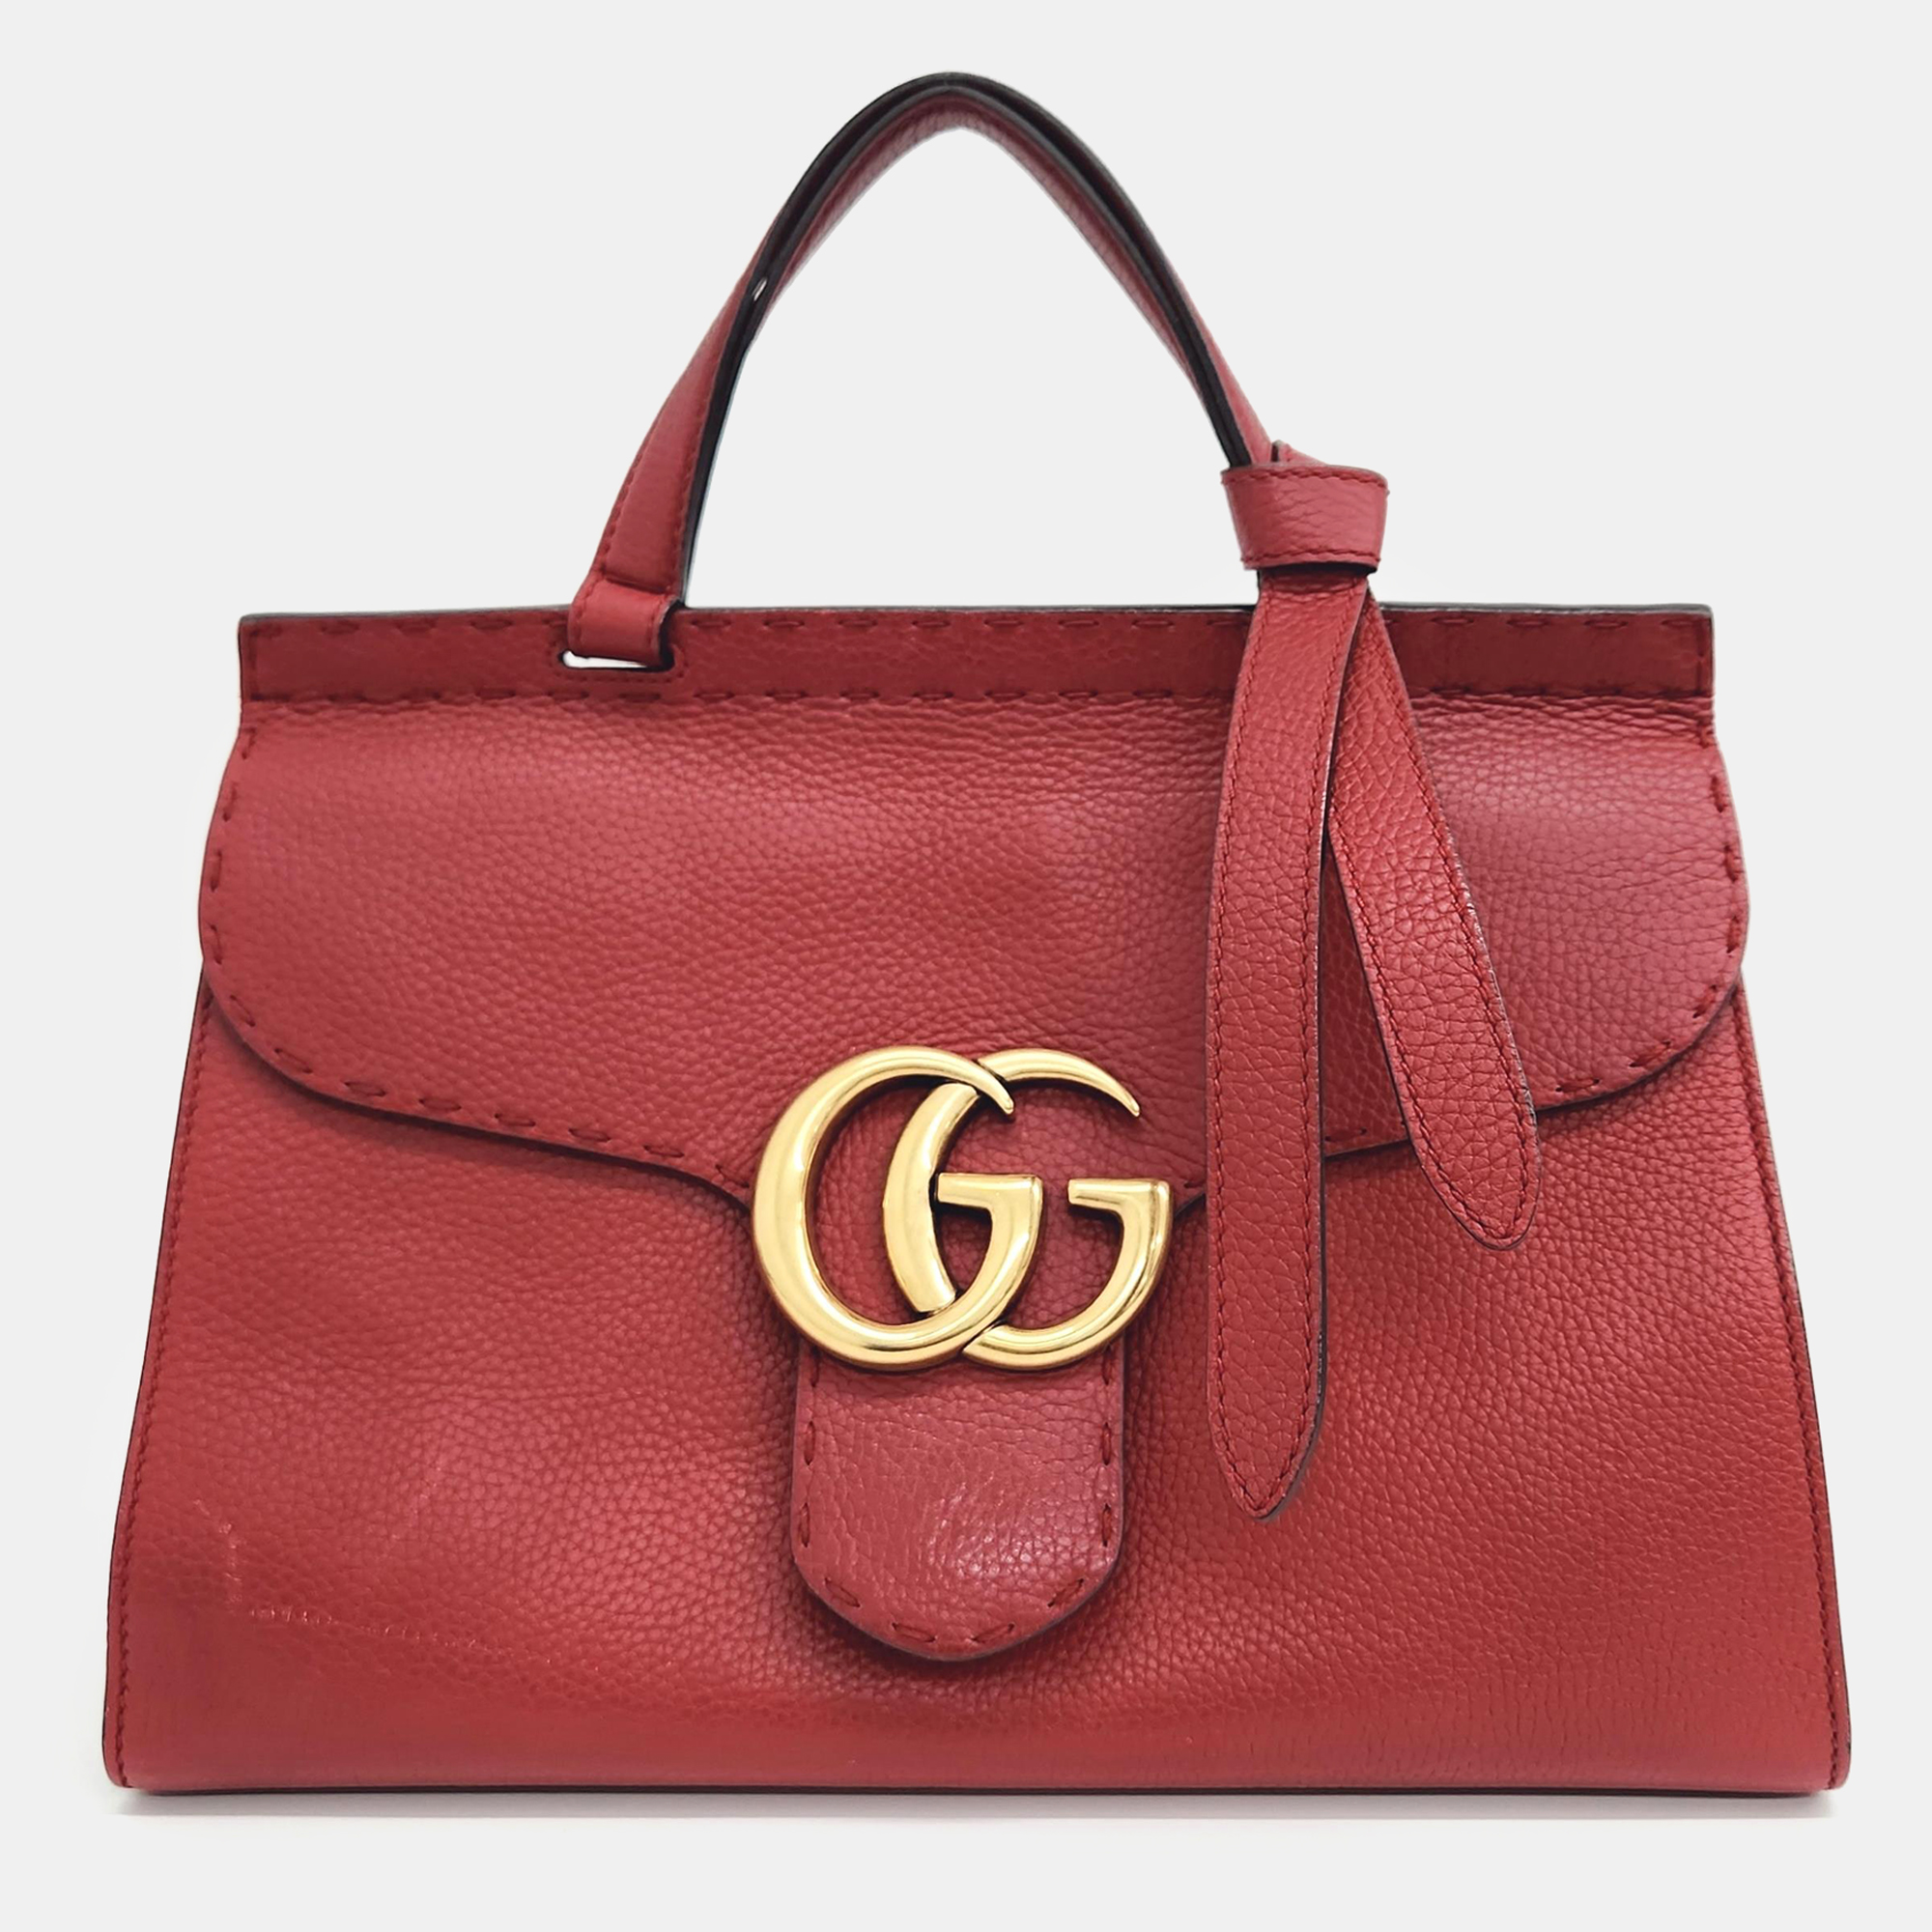 Pre-owned Gucci Red Leather Gg Marmont Tote Bag